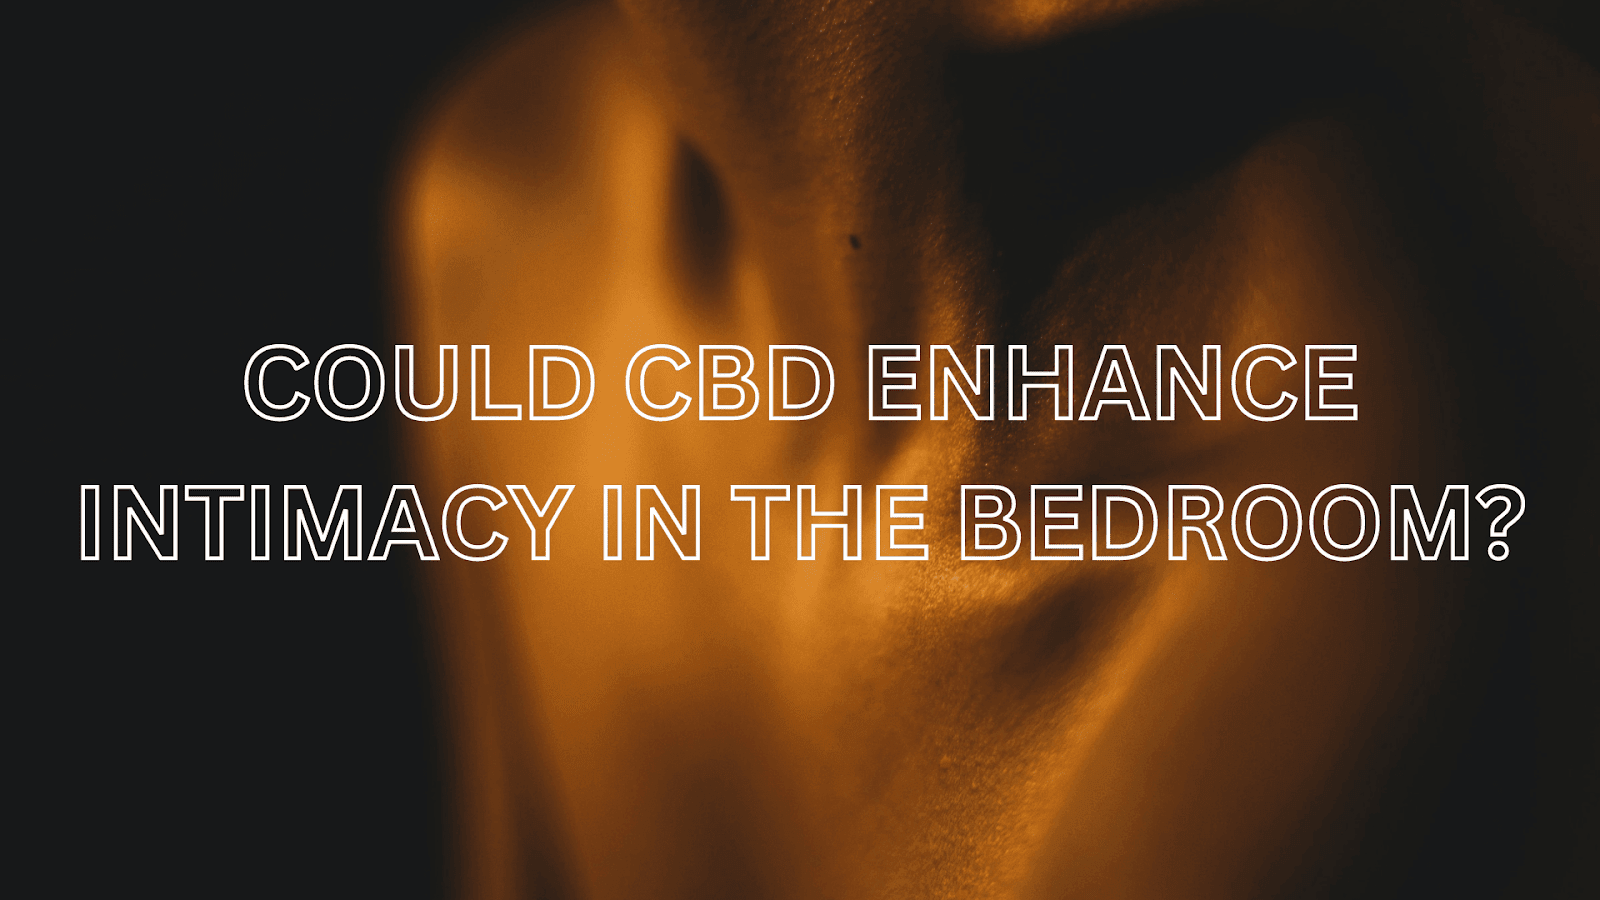 Could CBD Enhance Intimacy in the Bedroom